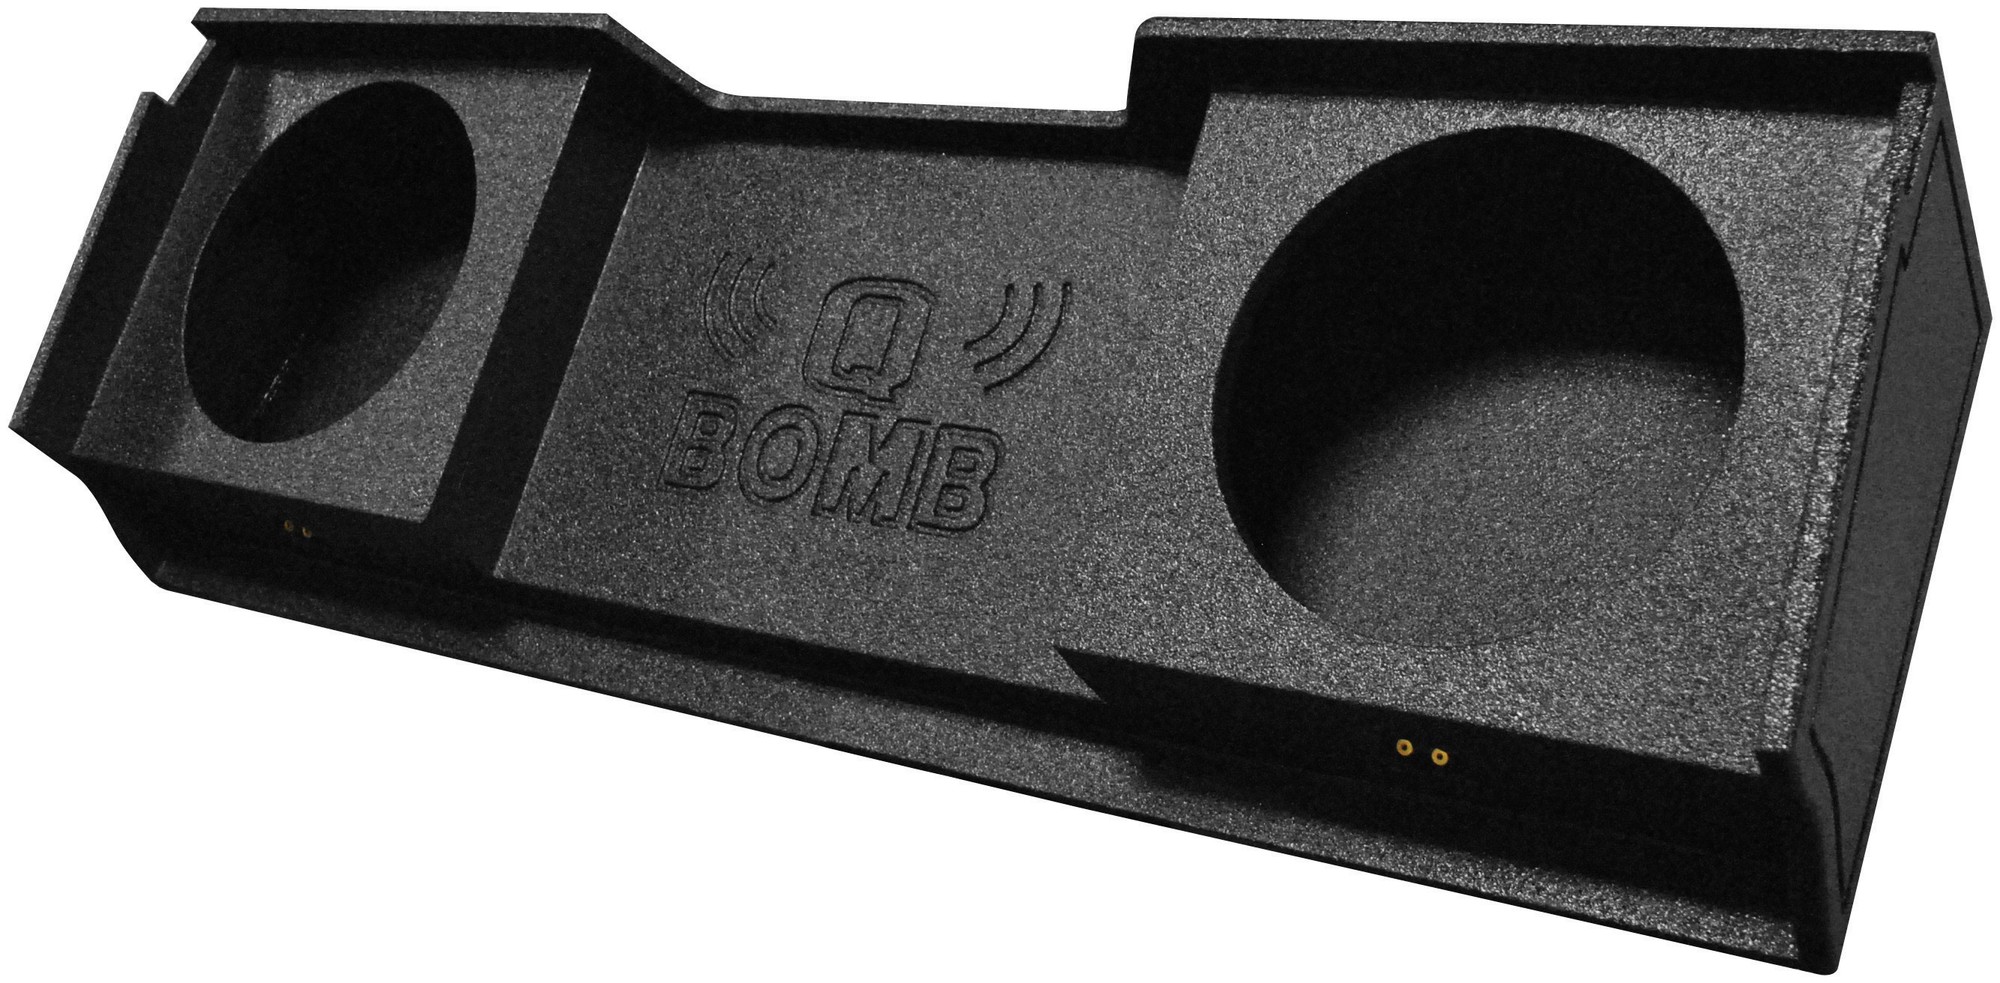 QPower "QBOMB" Chevy/GMC Extended Cab '99-'06 Dual 12" Empty Woofer Box